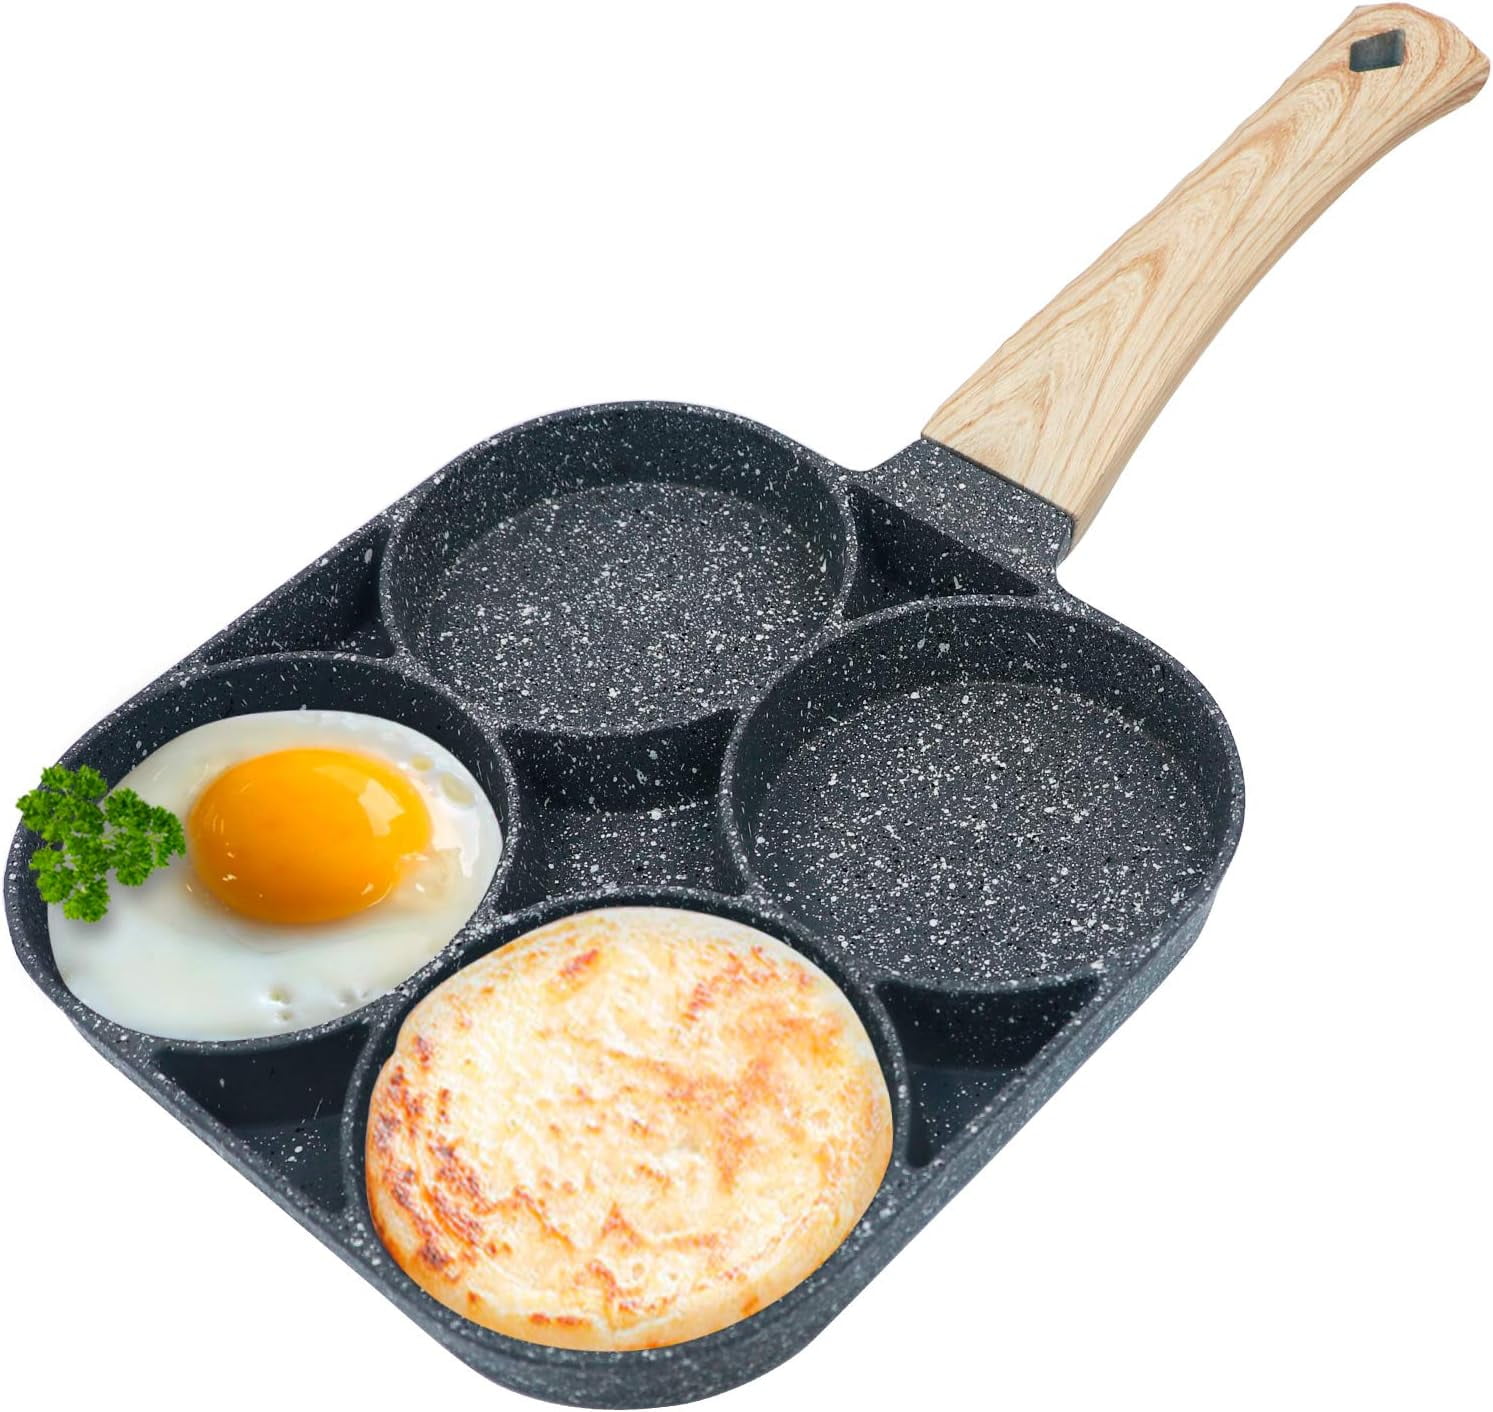 Non-Stick Egg Frying Pan with Wooden Handle - 4 Holes for Pancakes,  Omelets, and Burgers - Suitable for Induction Cookers and Gas Stoves -  Perfect for Home Cooking and Breakfast Recipes 